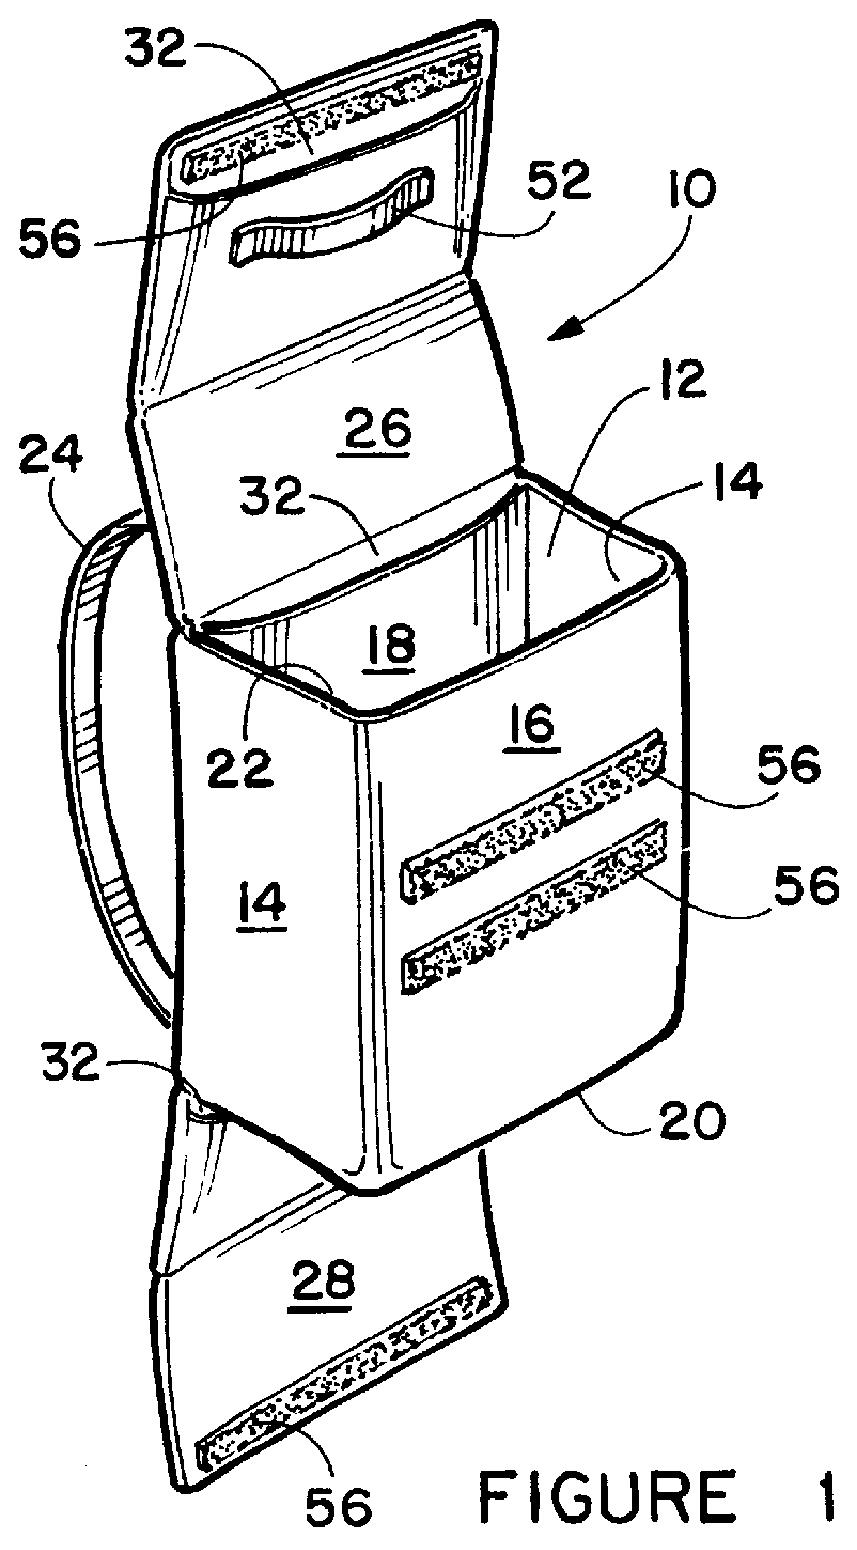 Bag style container with bullet resistant deployable panels